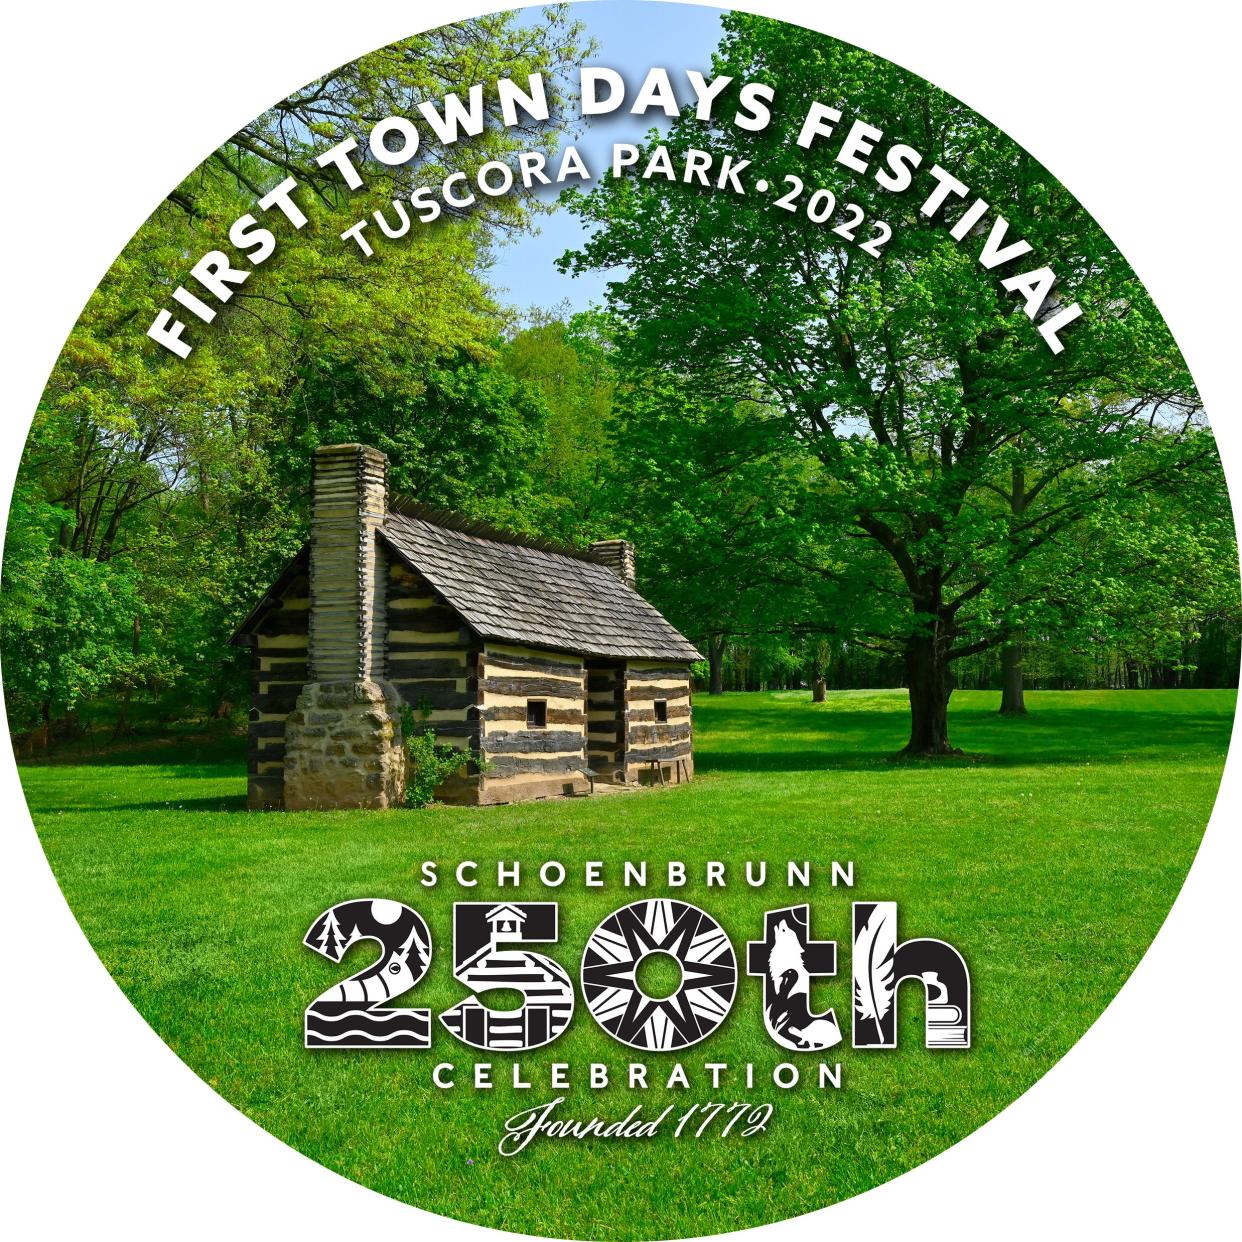 The 2022 First Town Days Festival plate will feature the 250th anniversary of the founding of Schoenbrunn Village.